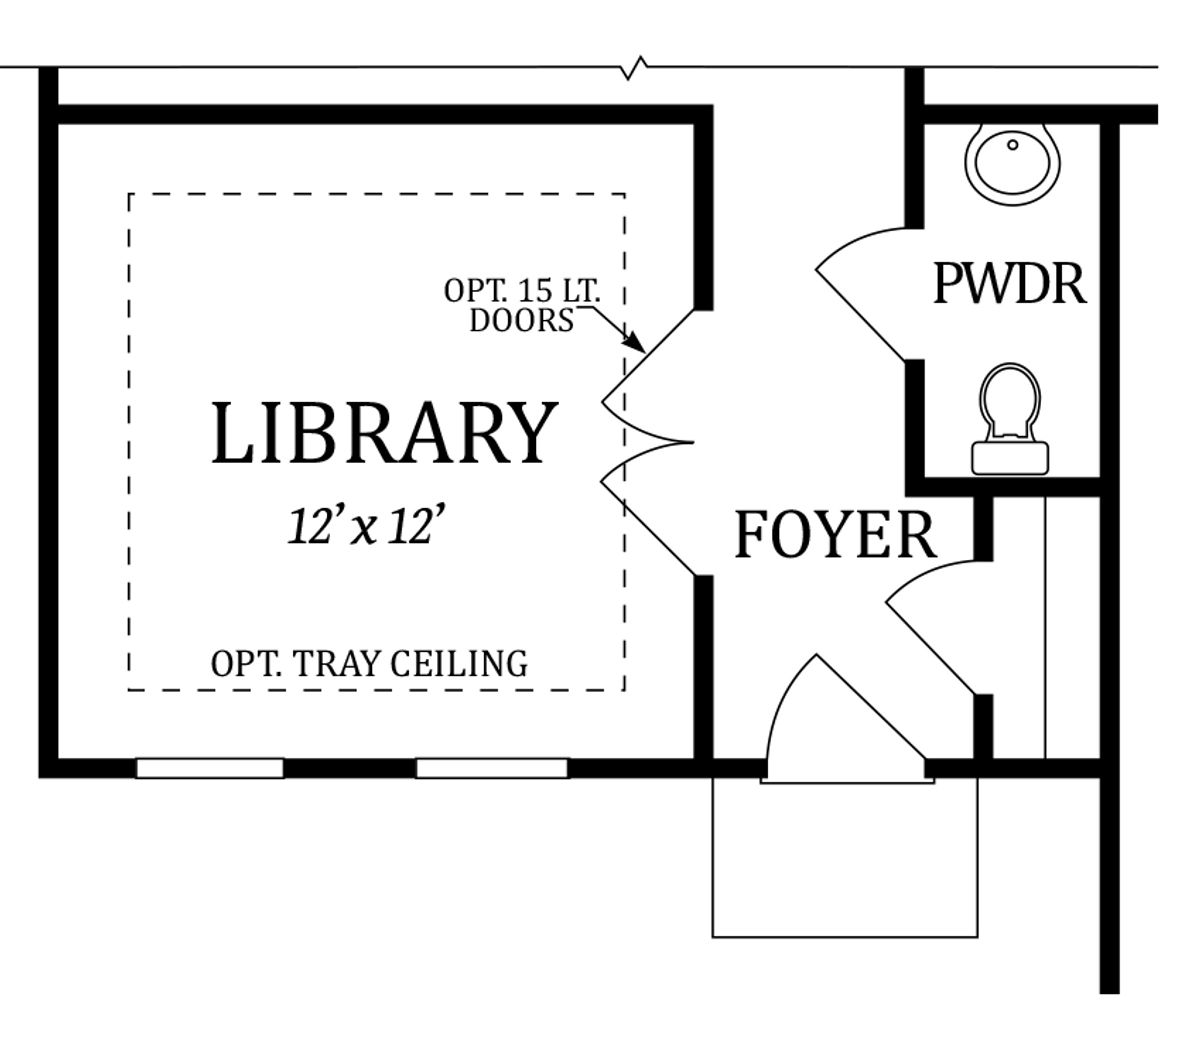 Optional Library | In Lieu of Choice Room